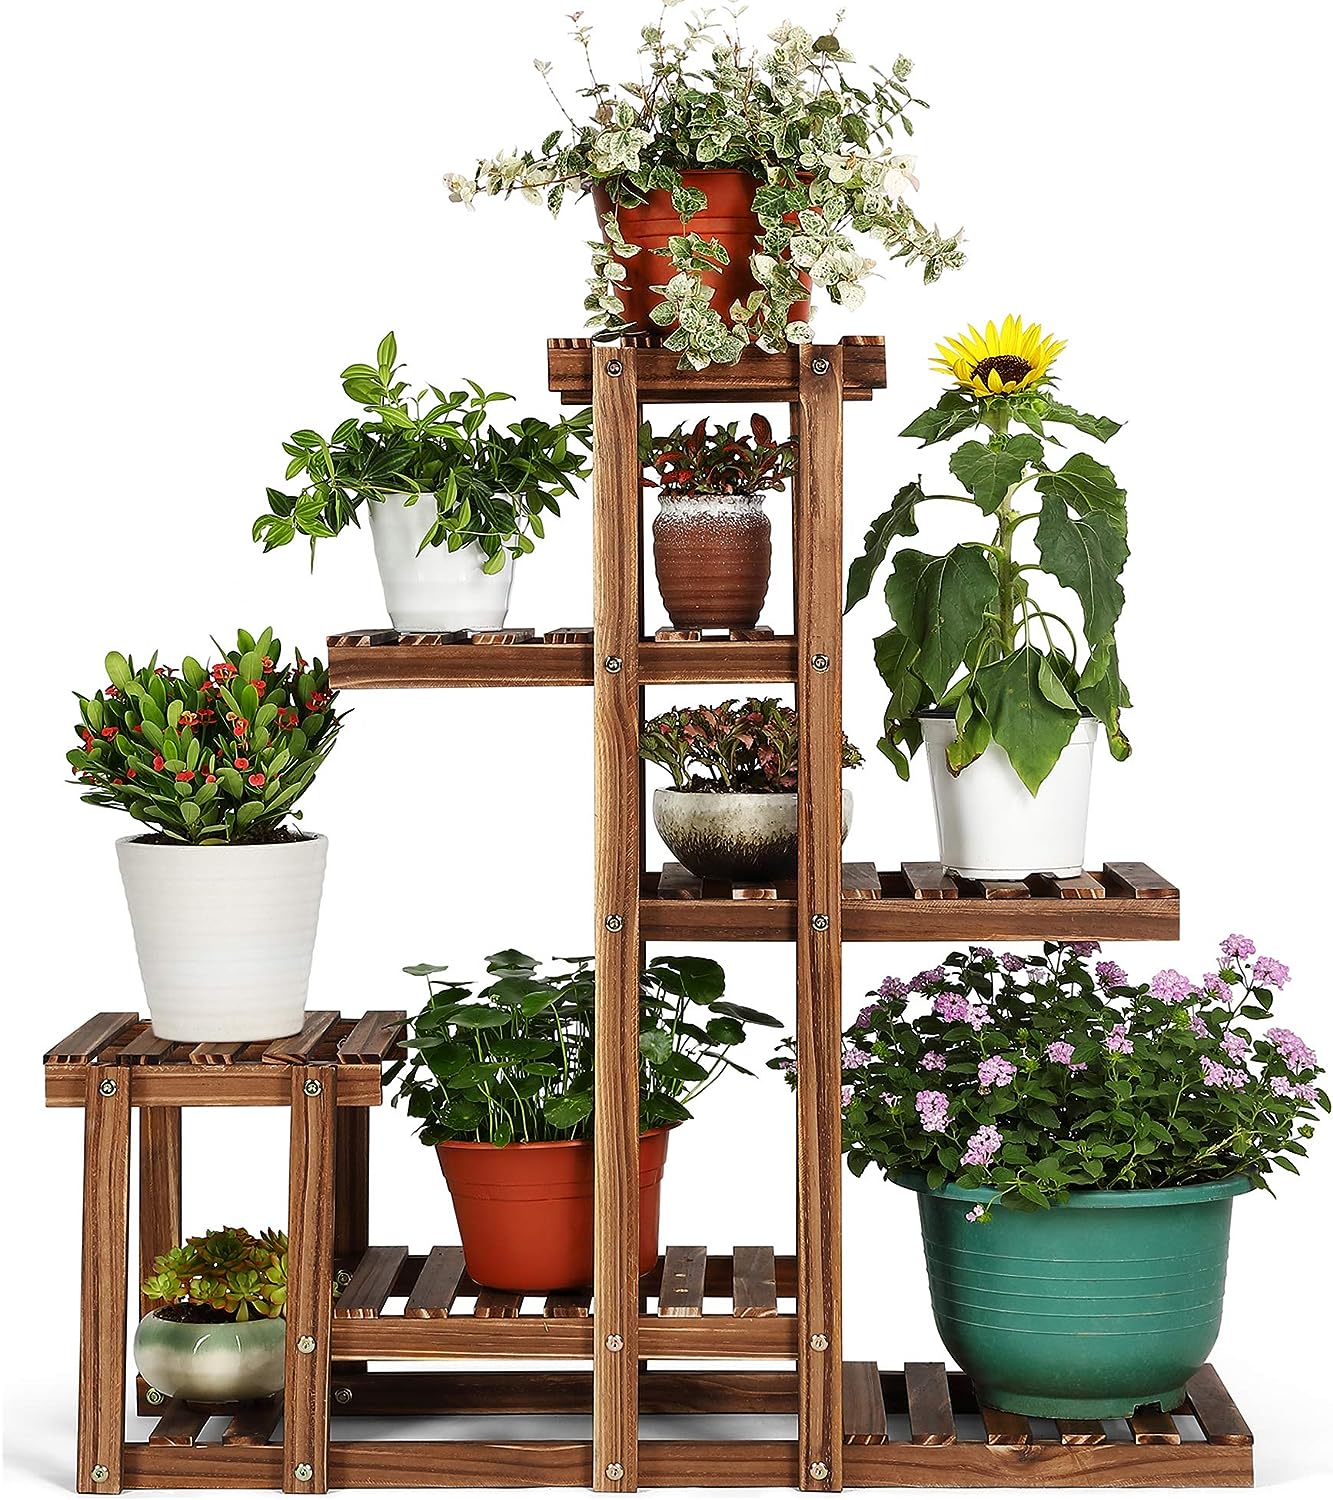 PETUPPY Plant Stand Indoor Outdoor Review